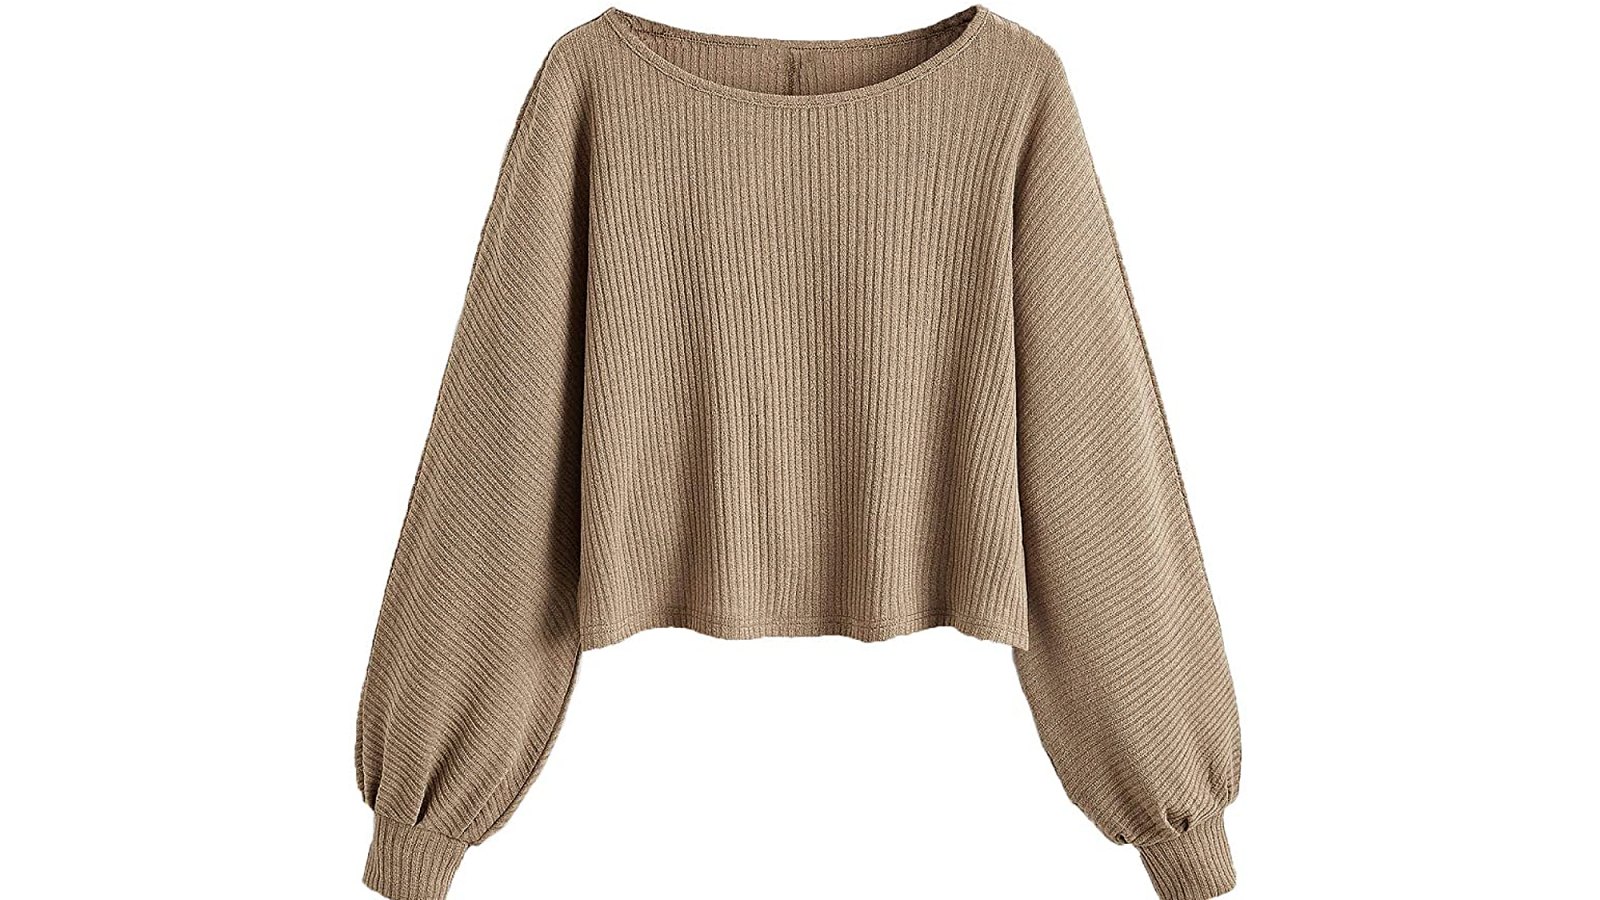 SweatyRocks Soft Ribbed Knit Top Is an Under-$25 Fashion Steal